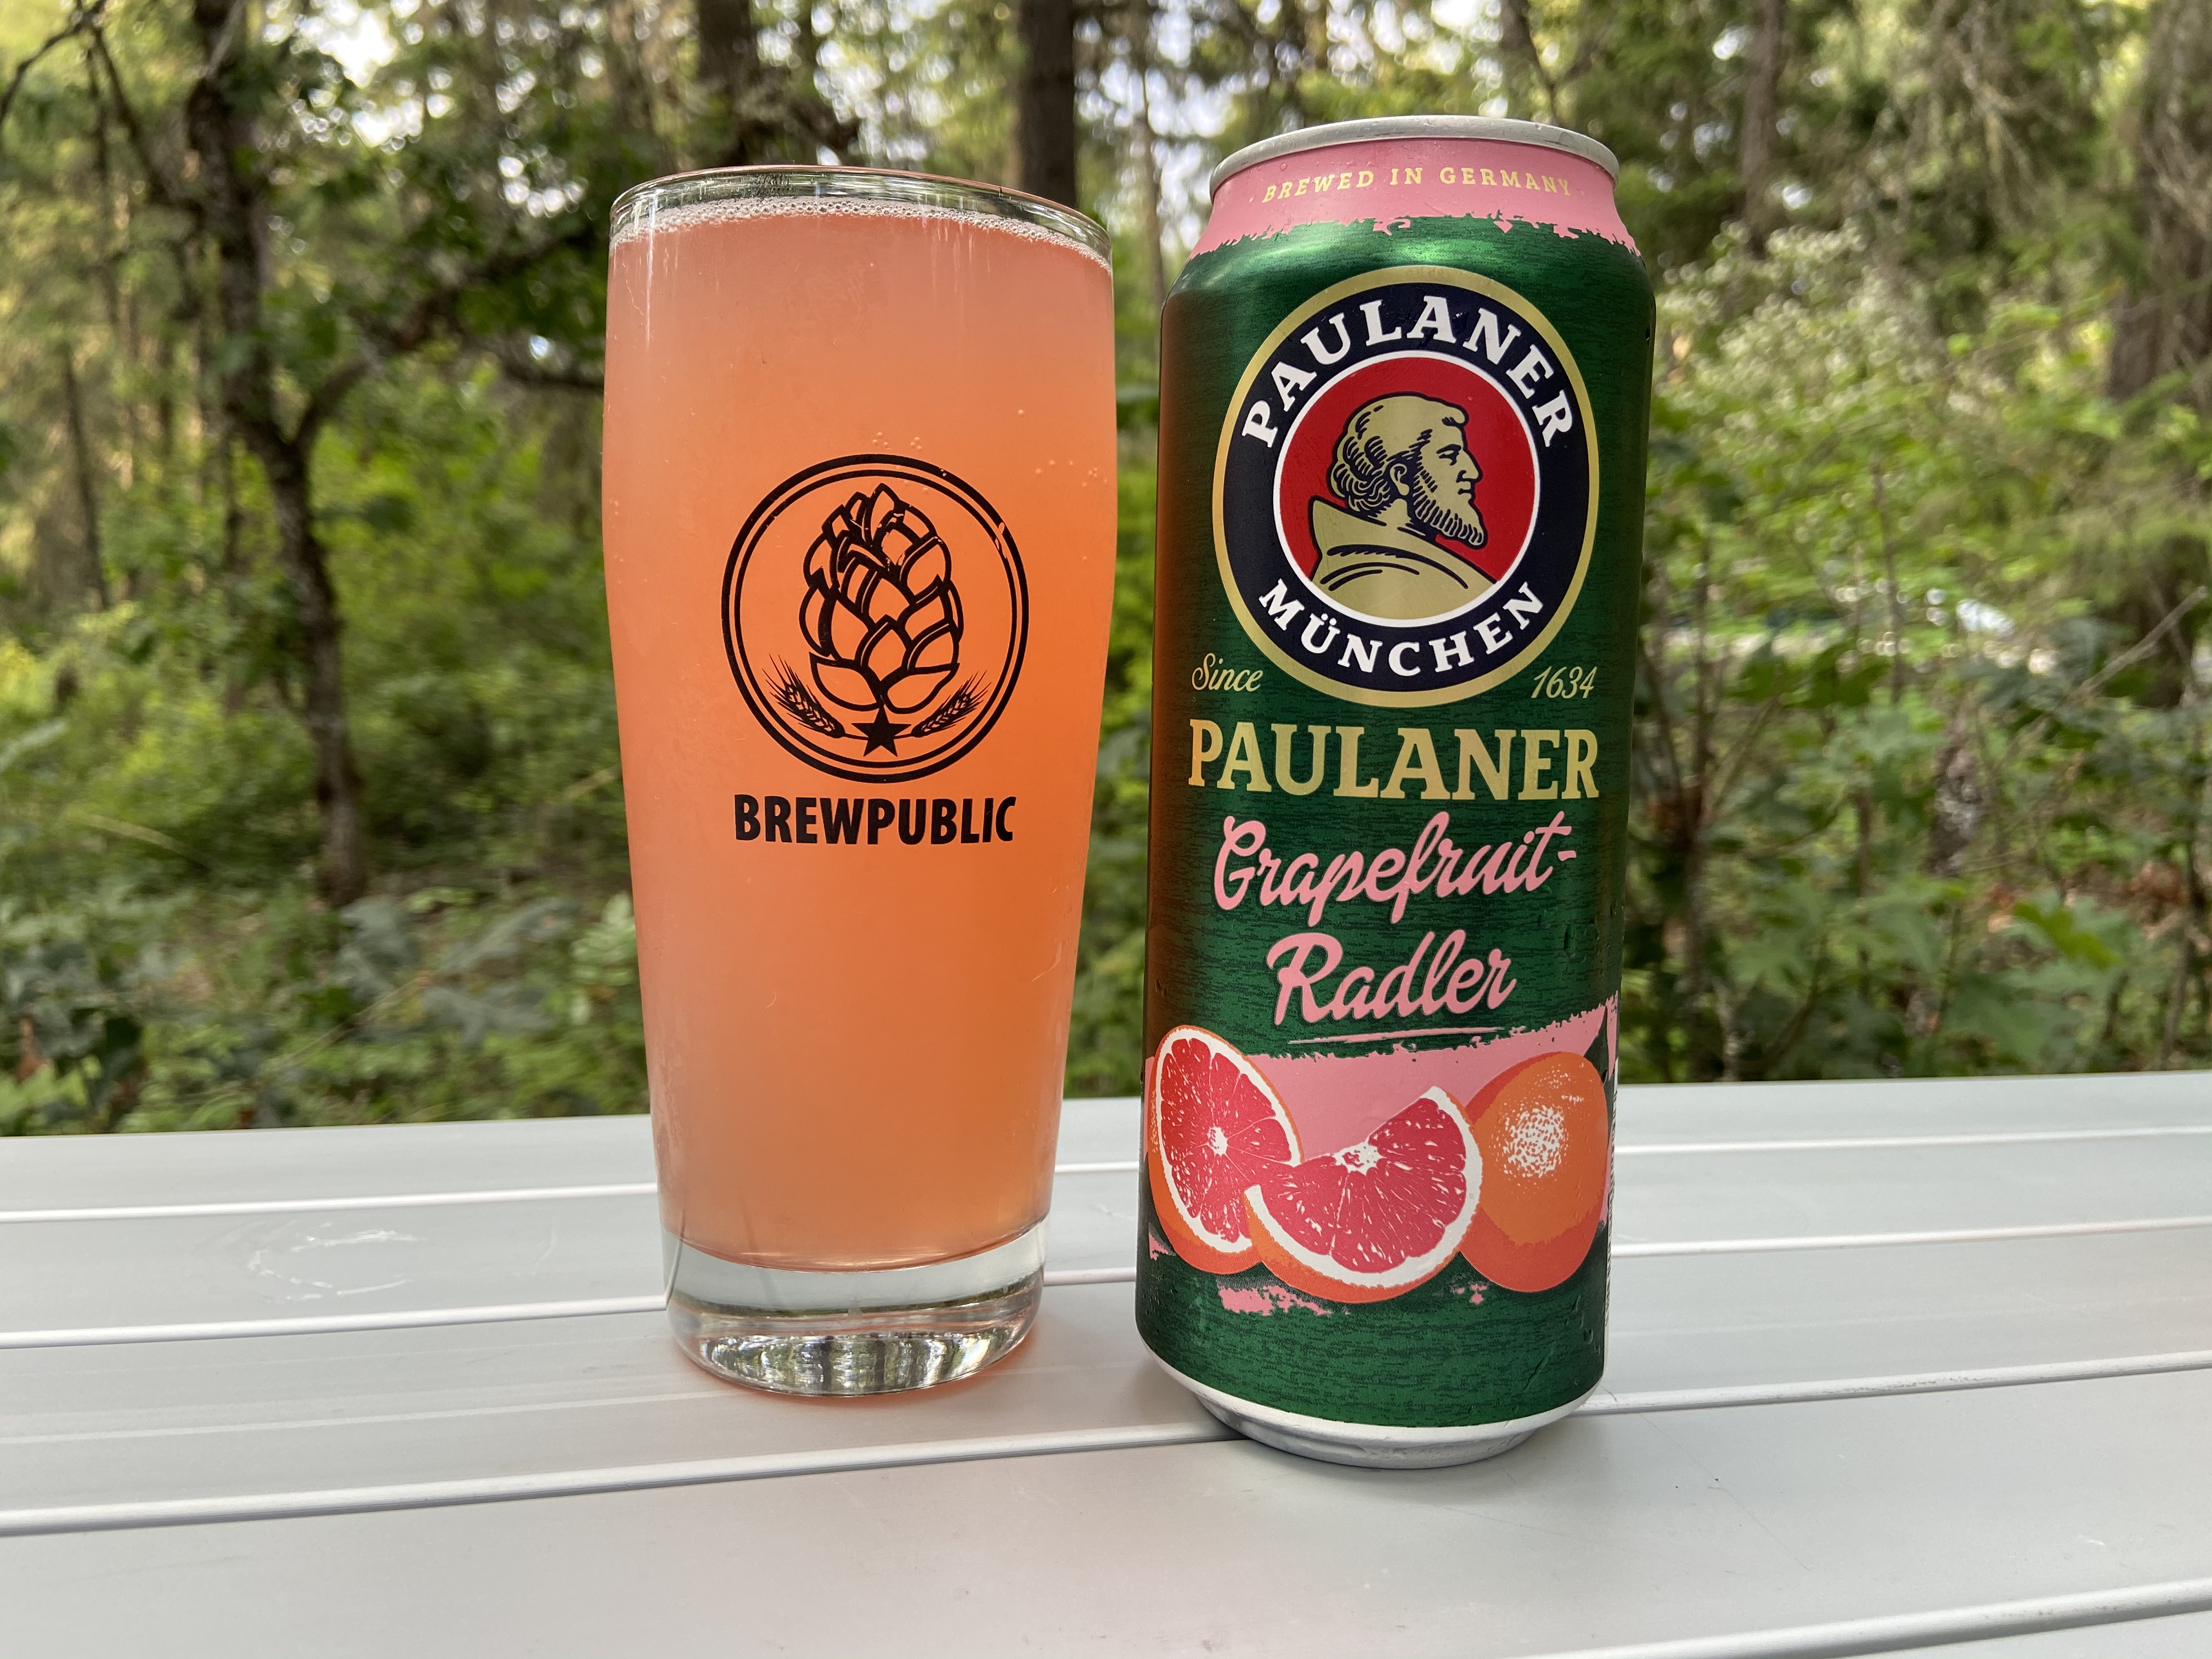 The new Paulaner Grapefruit Radler that is now available in the United States.